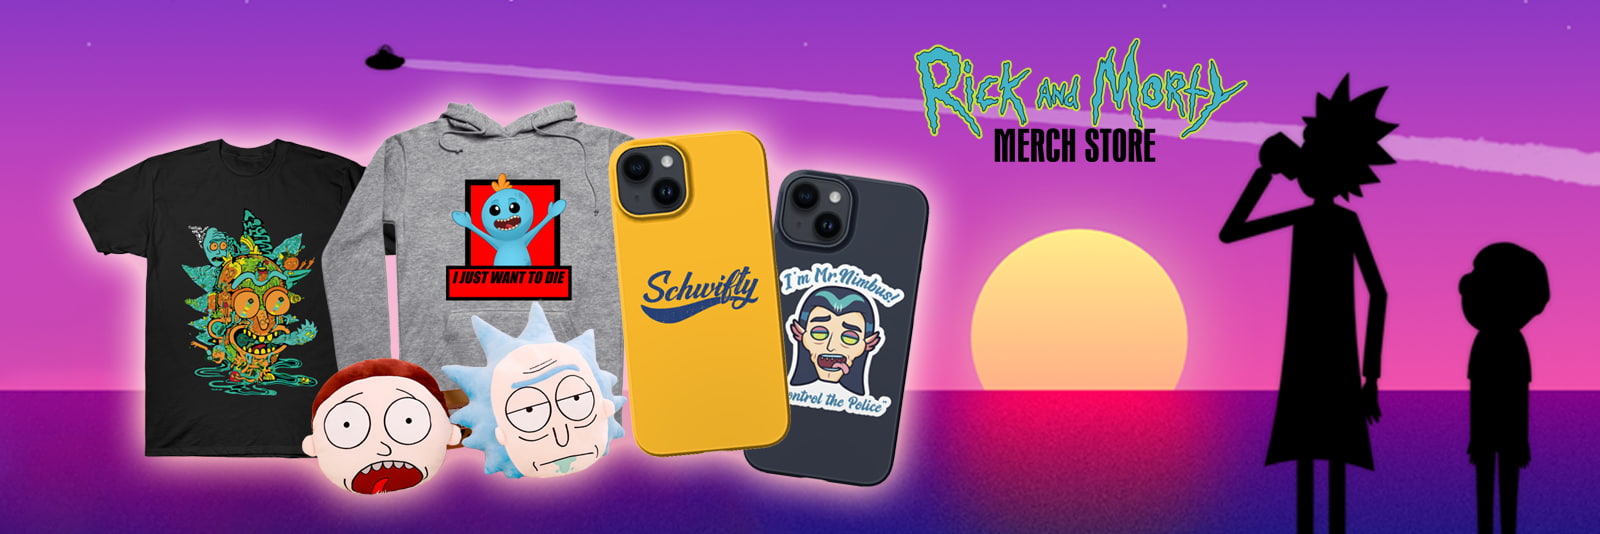 rick and morty merch store banner